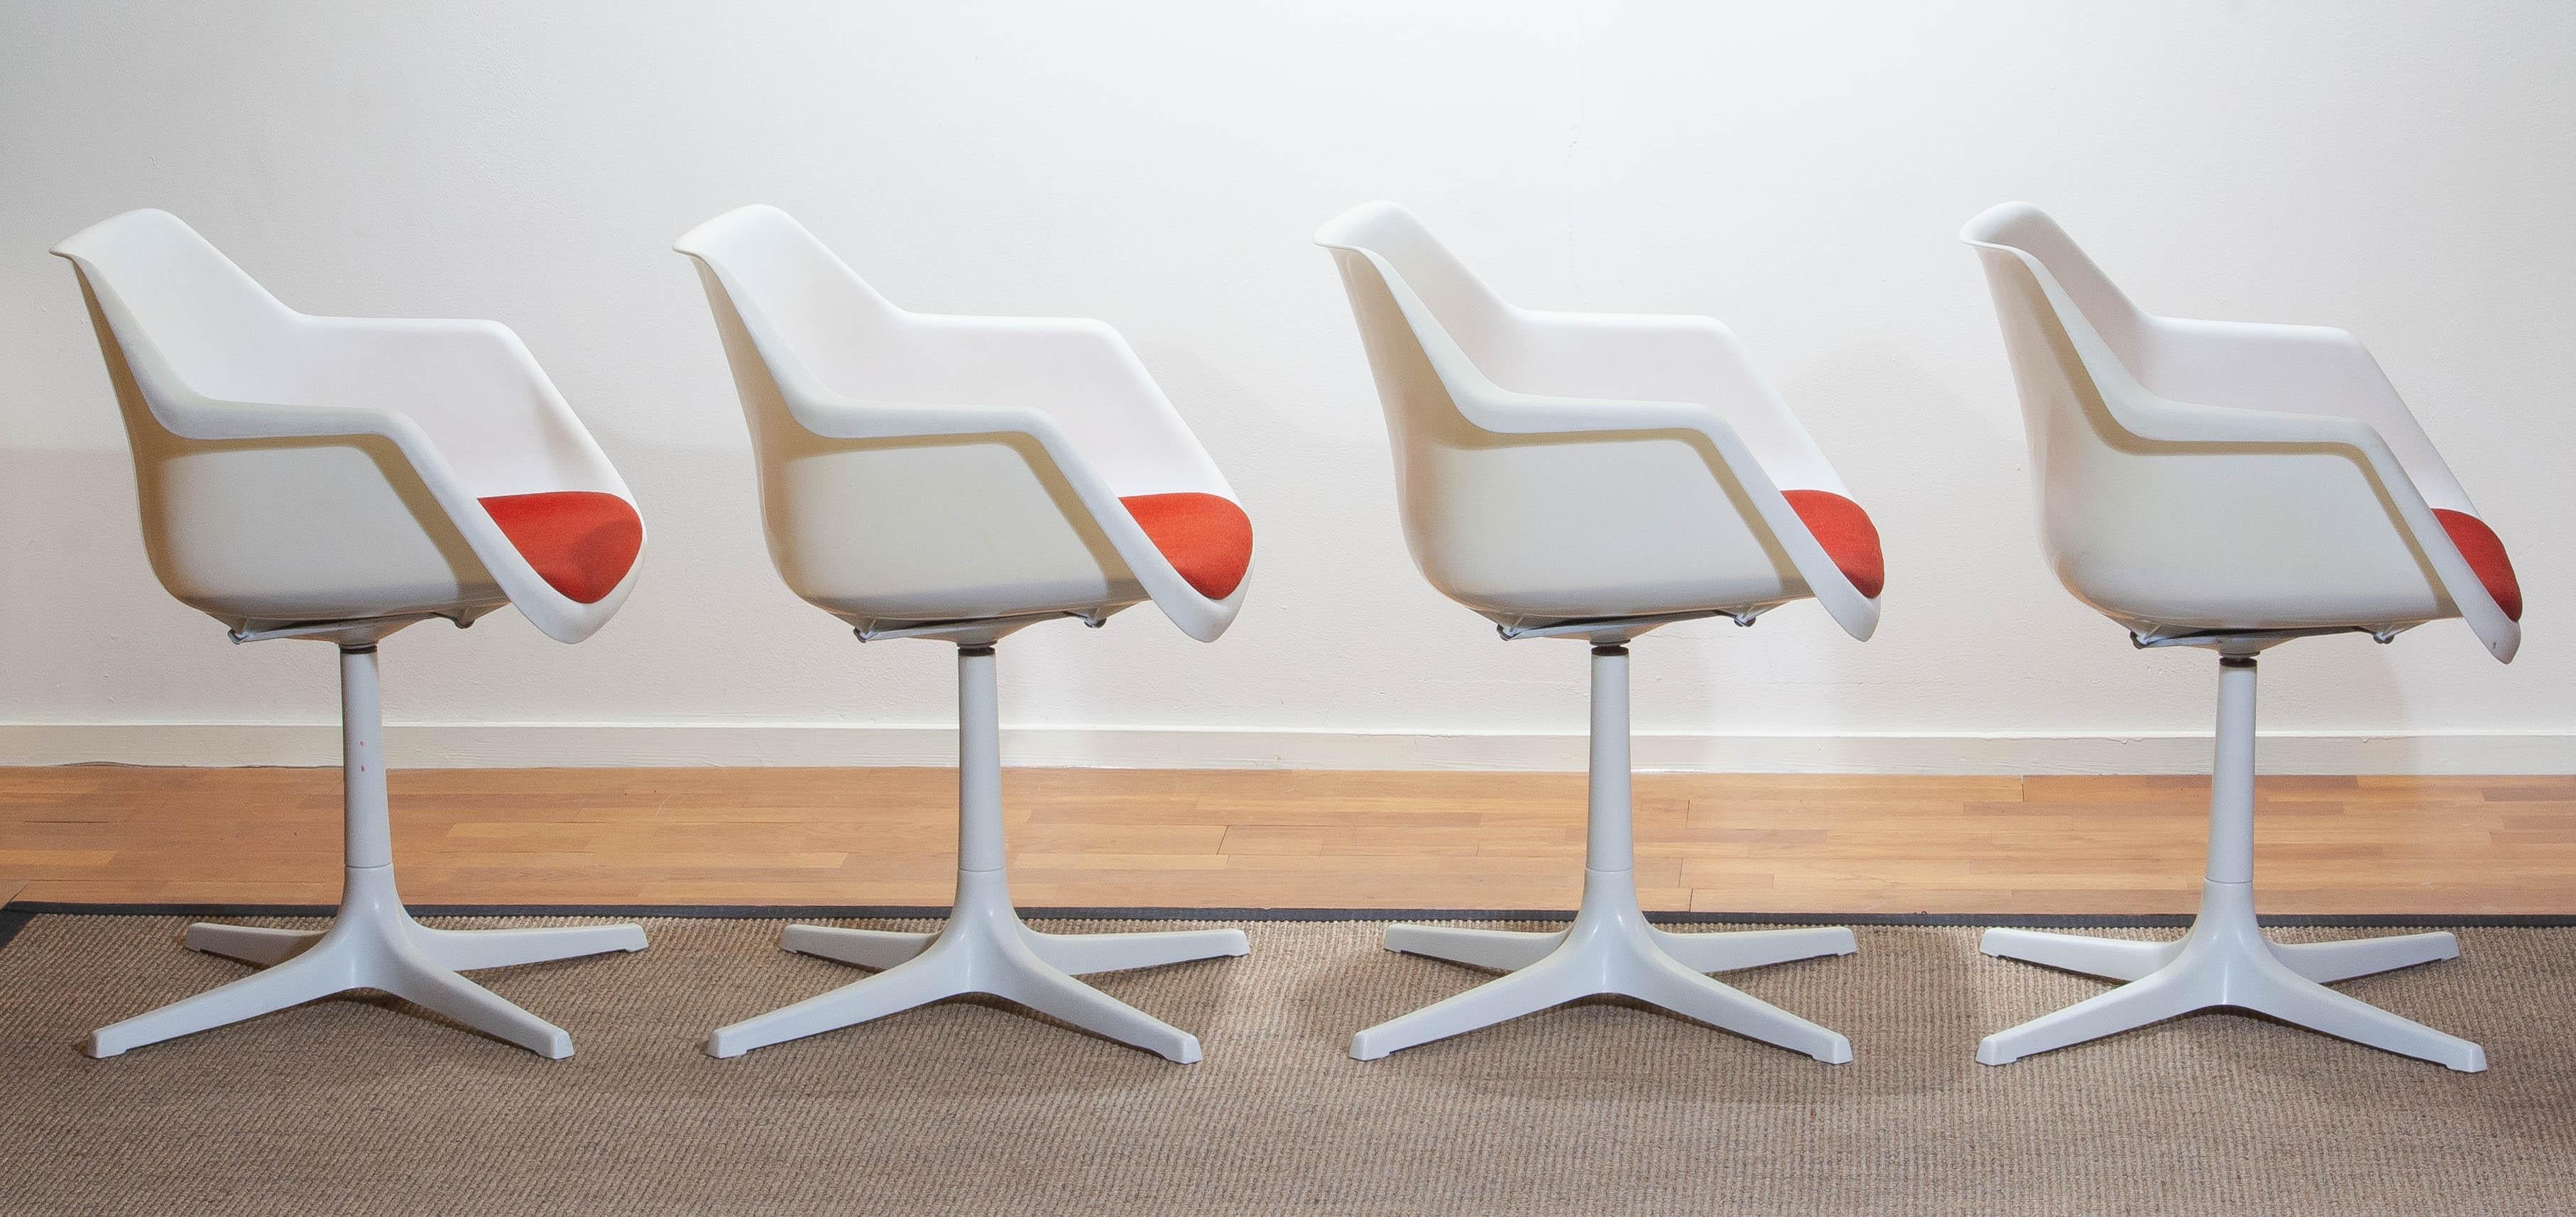 French Set of Four White Swivel Chair by Robin Day for Hille, France, 1960